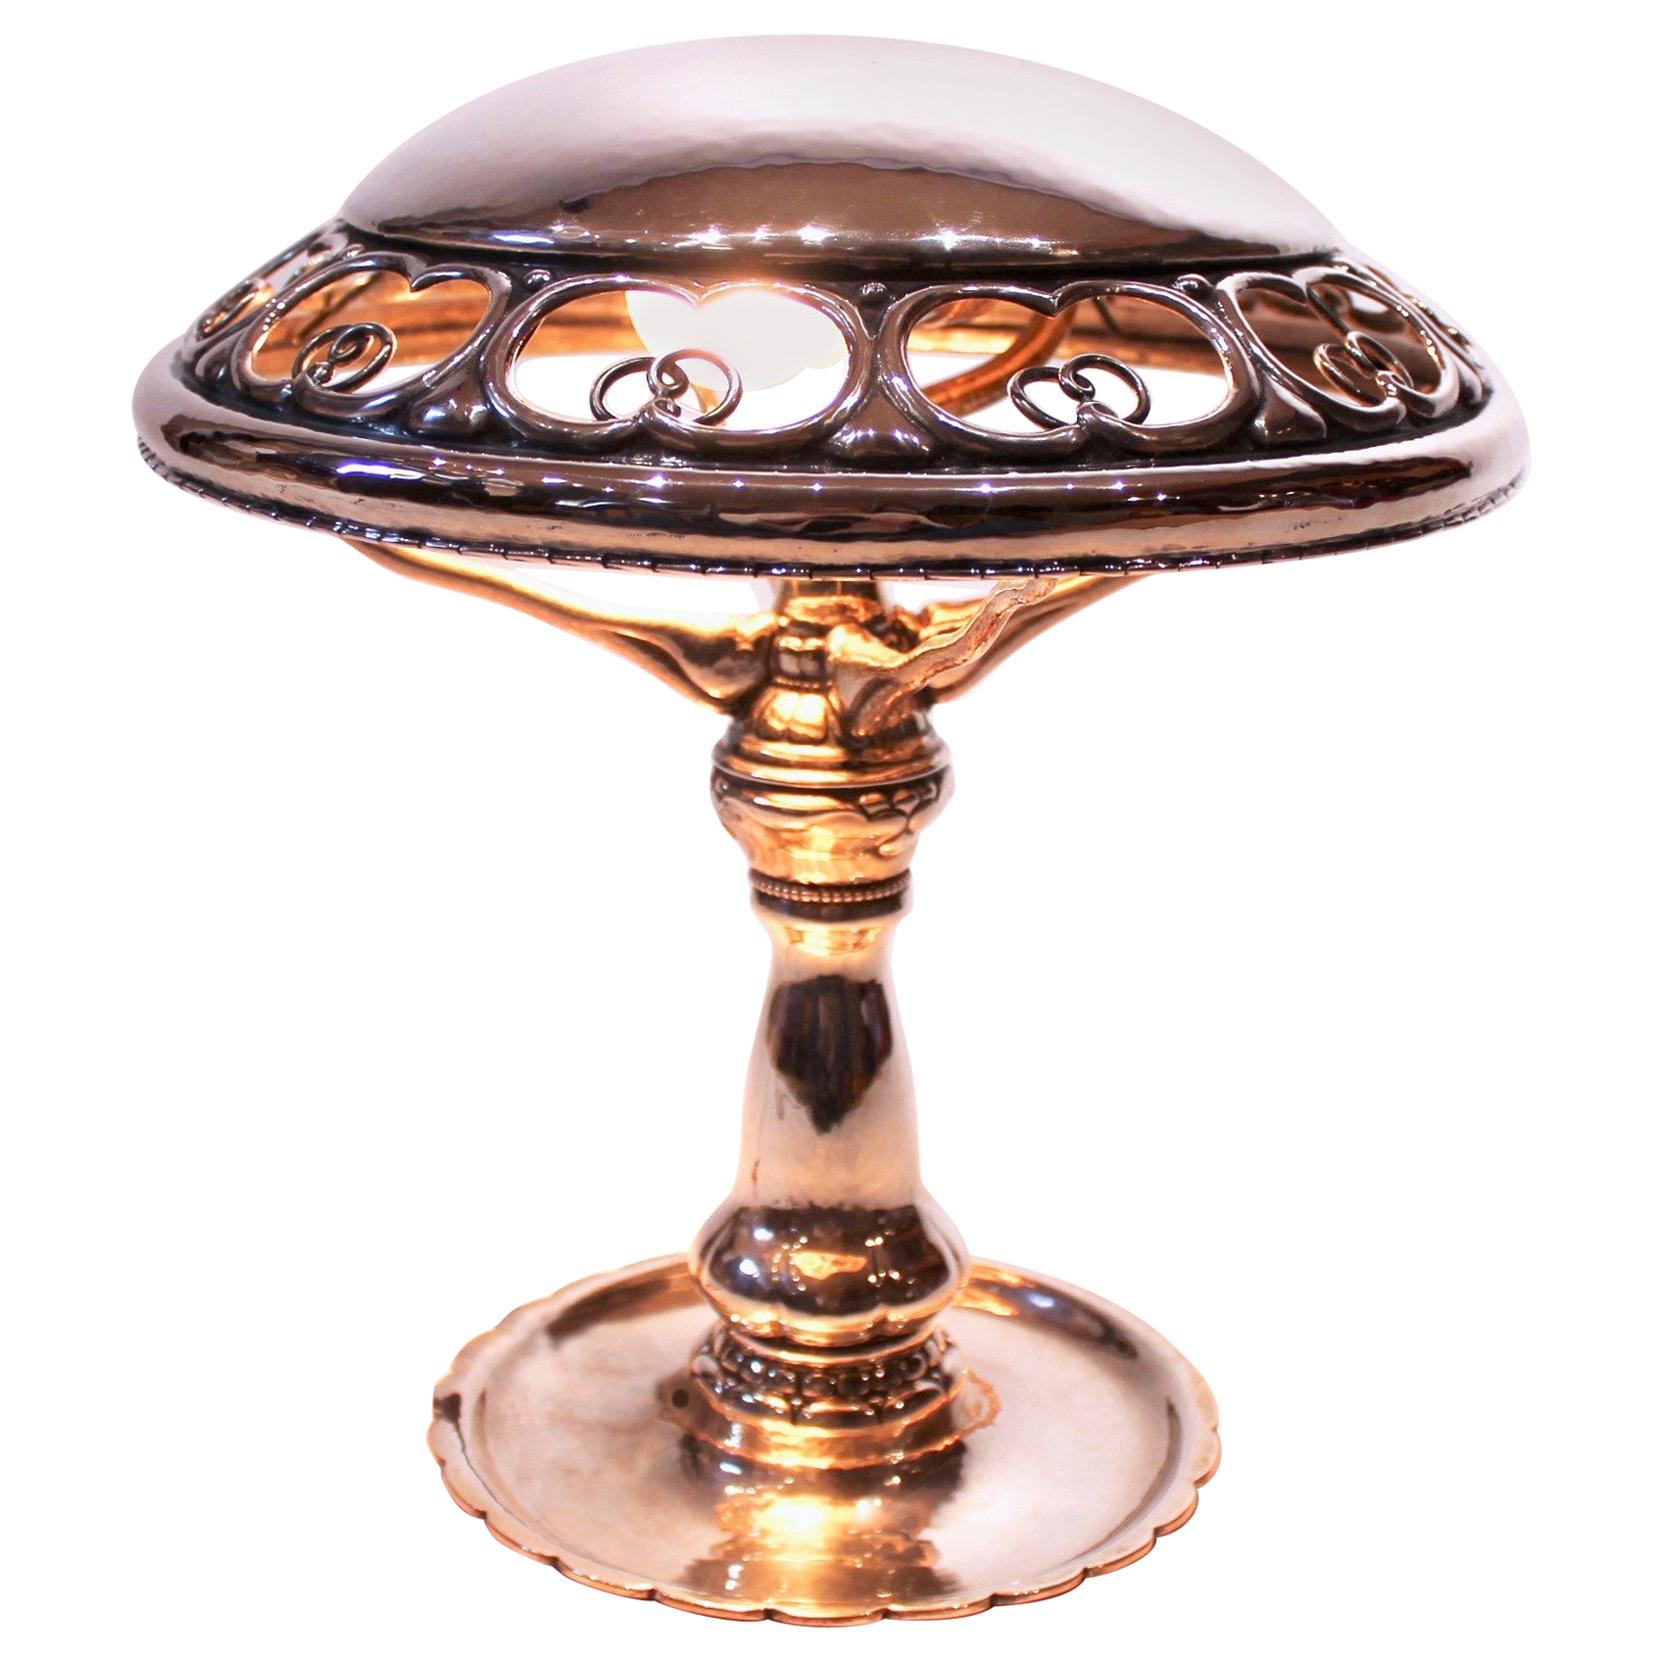 Table Lamp of Hallmarked Silver and Beautifully Decorated Shade